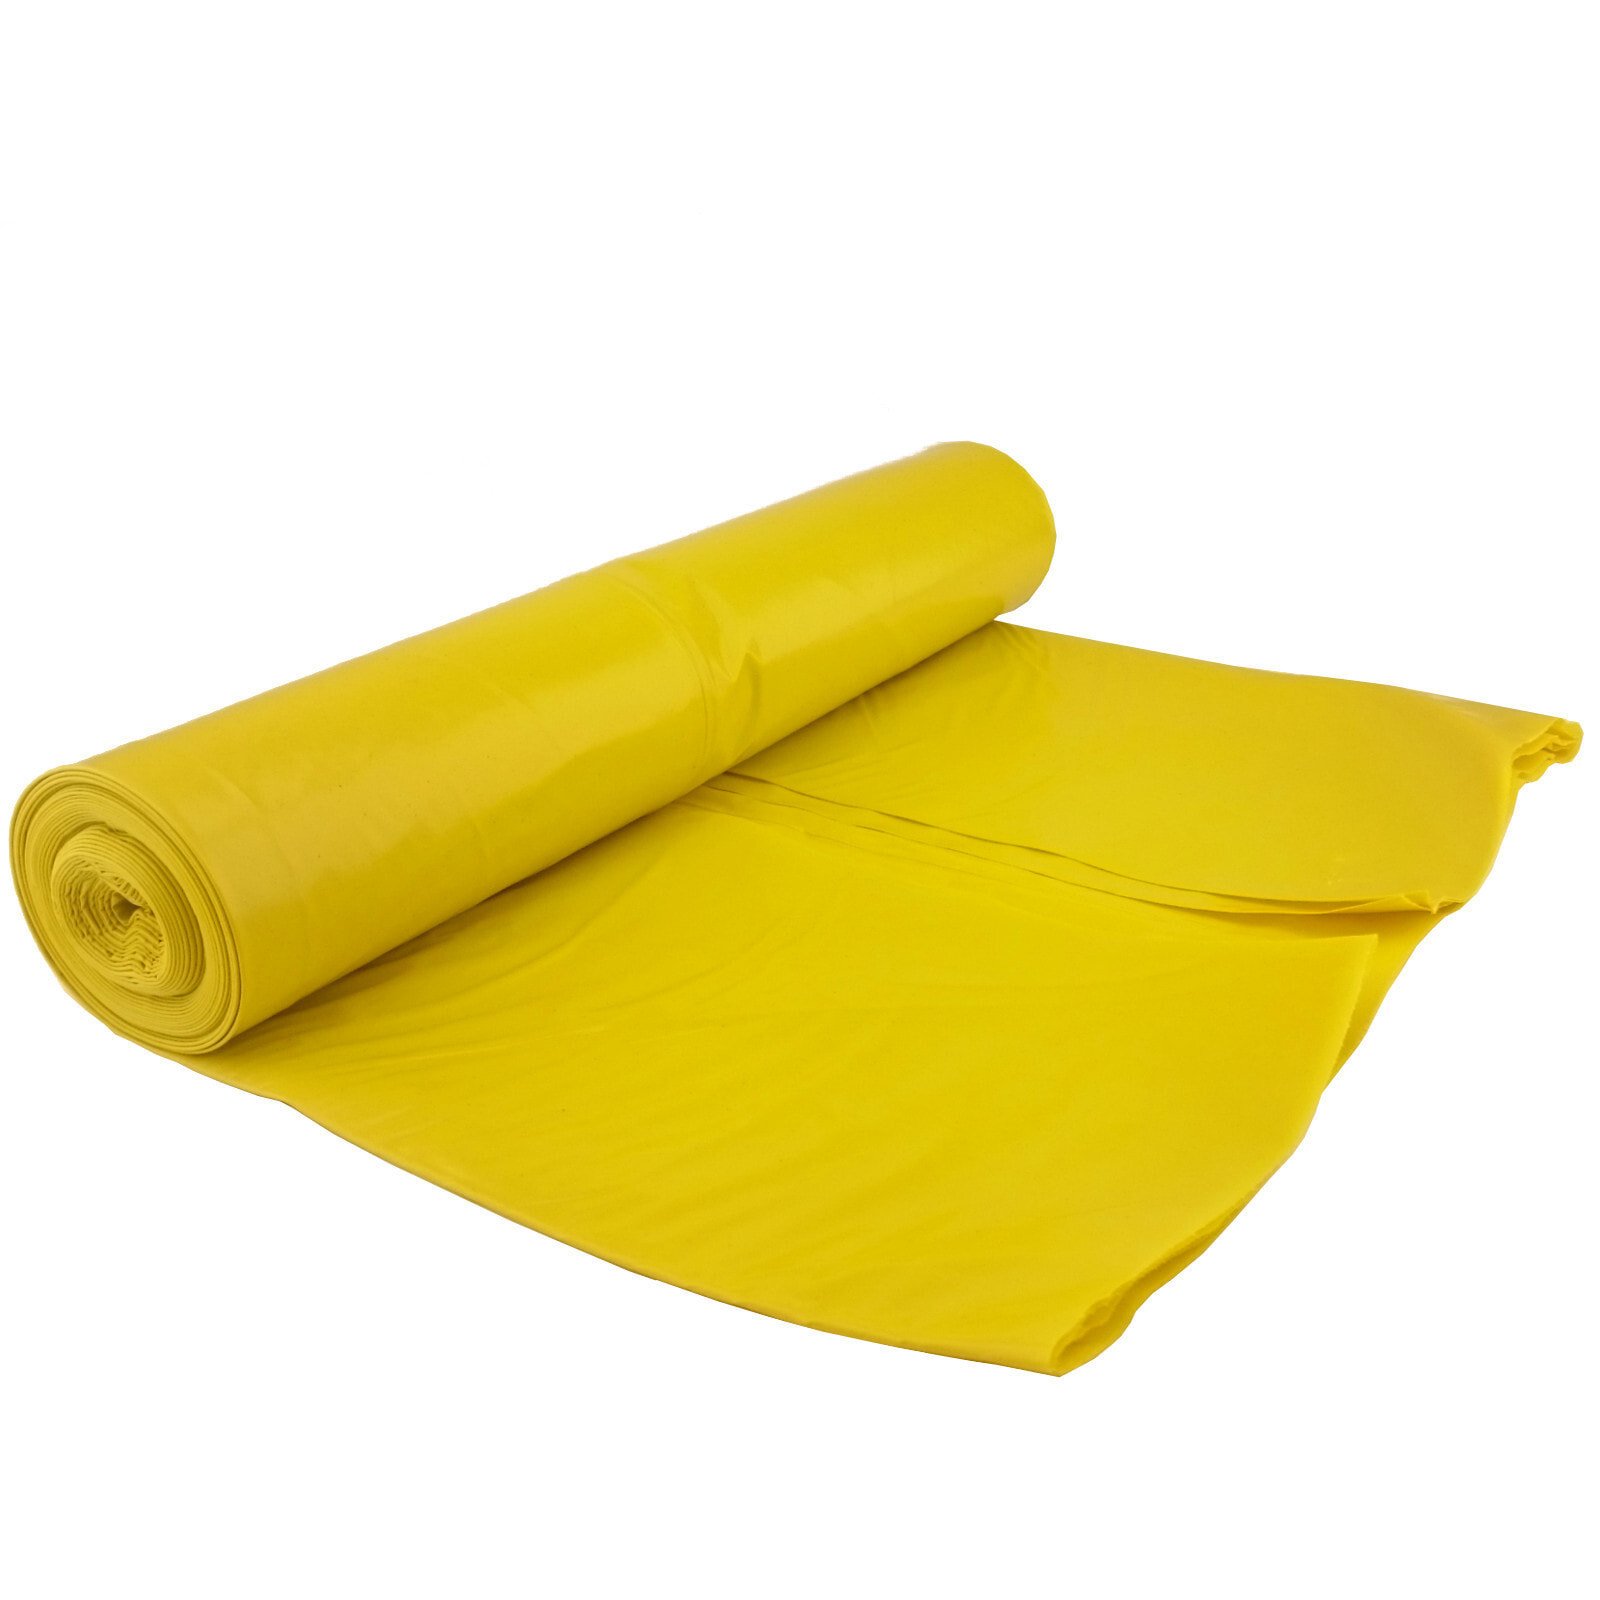 50 micron thick garbage bags. durable roll 25 pcs. - yellow 120L